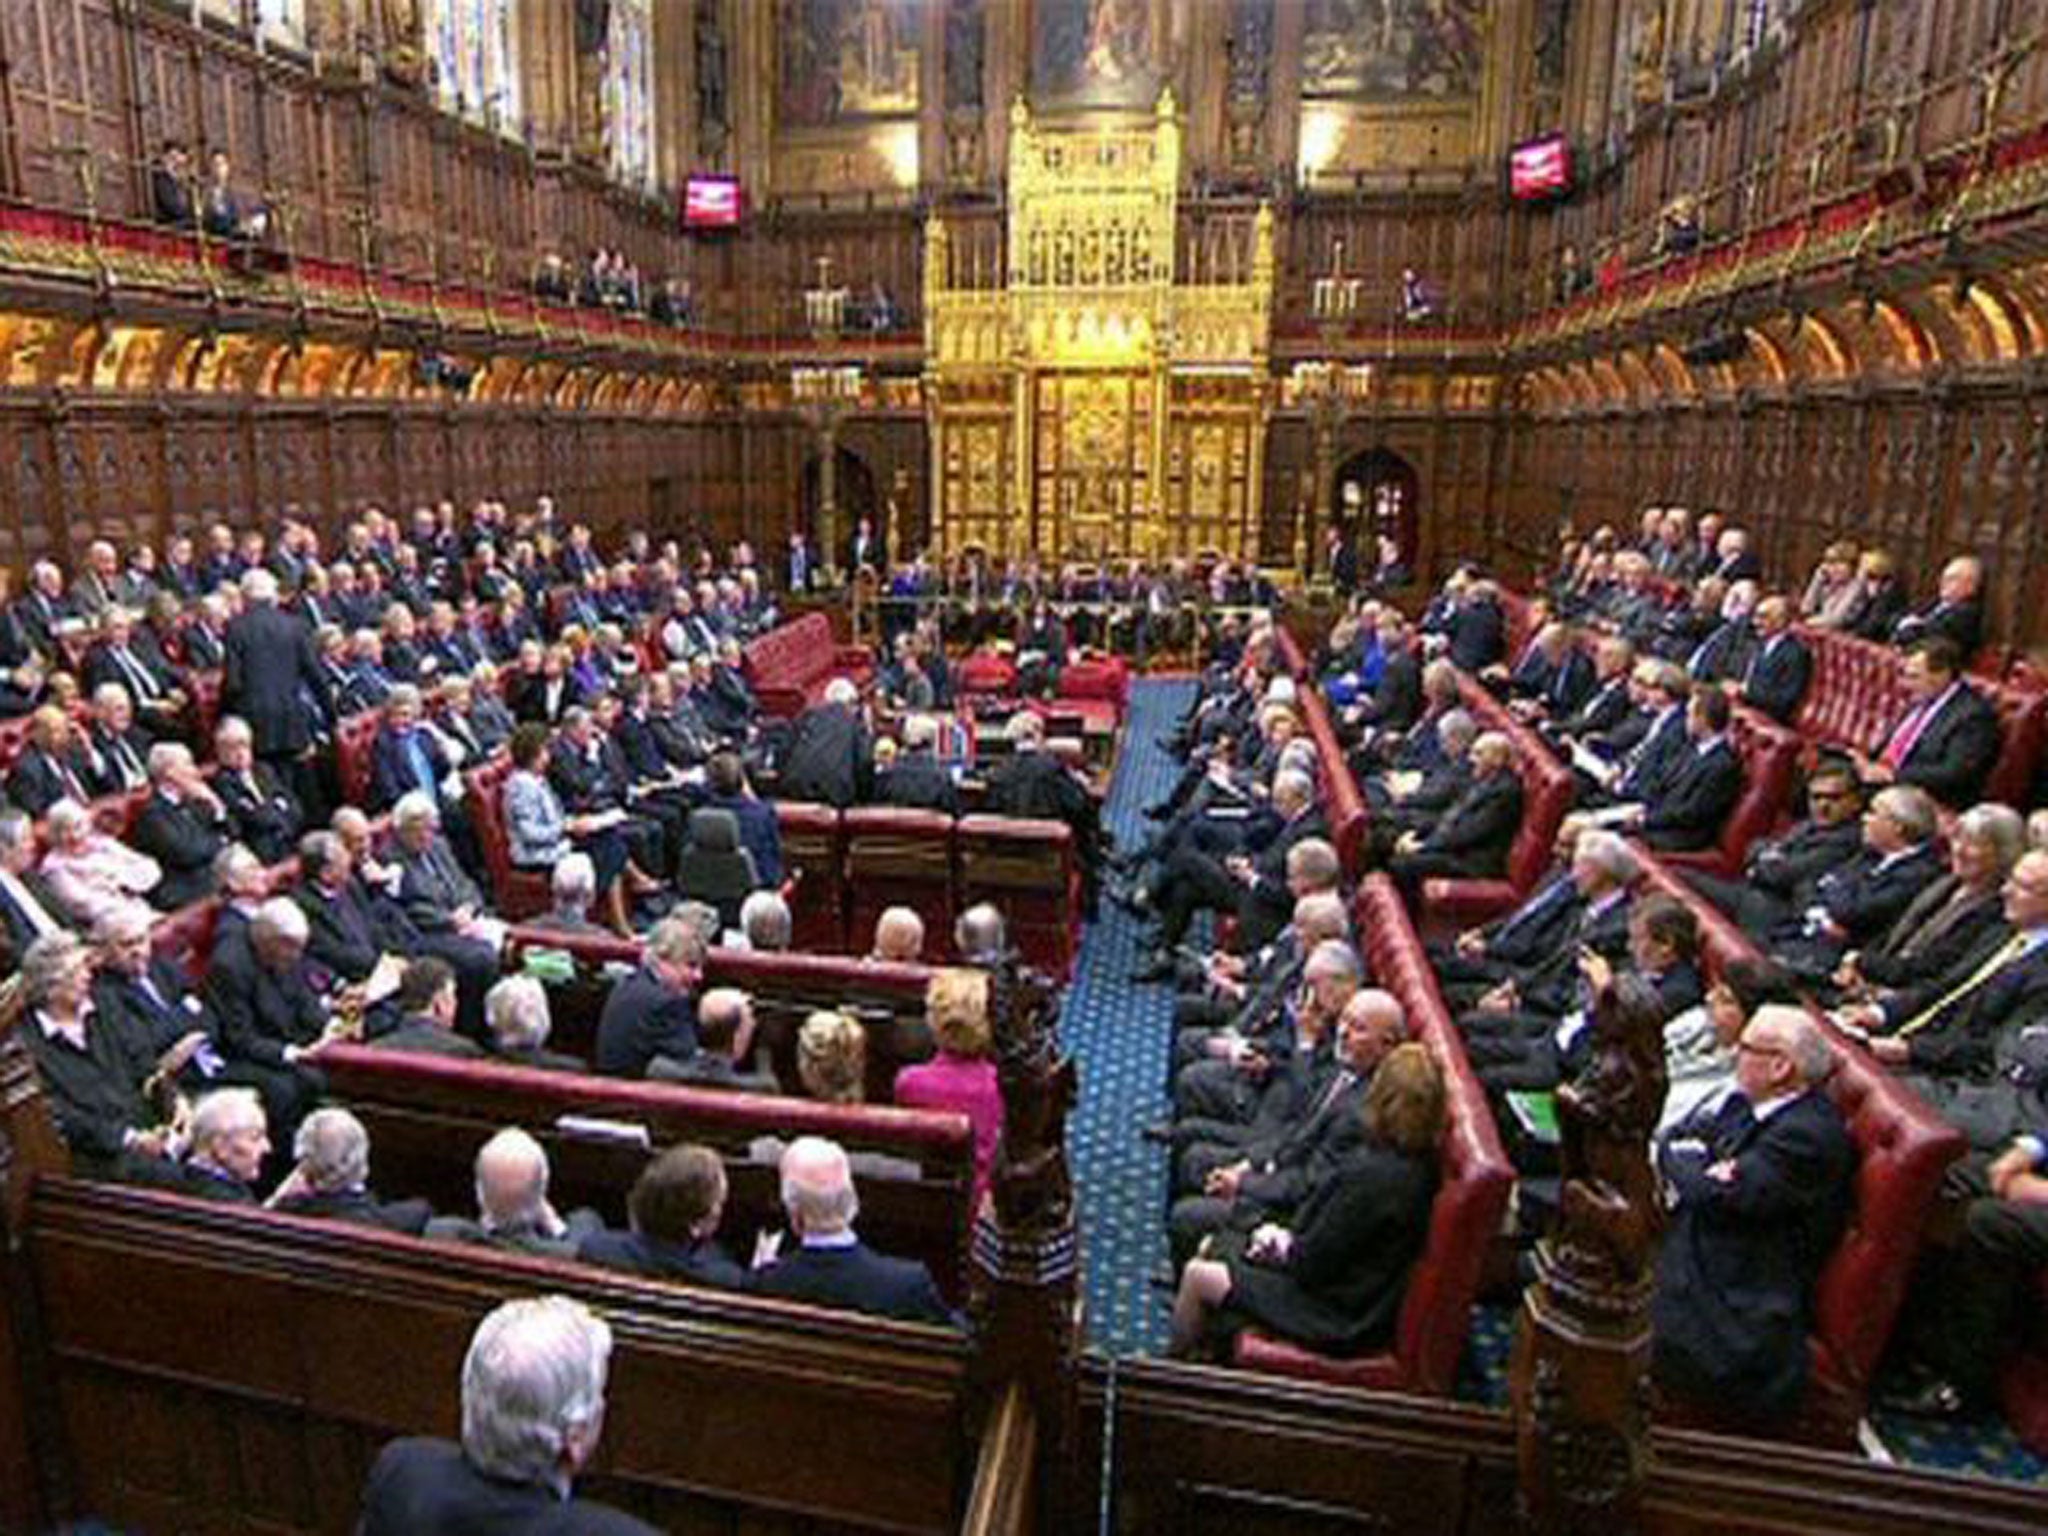 Lord Mackenzie and Lord Laird will not be able to sit in the House of Lords for months